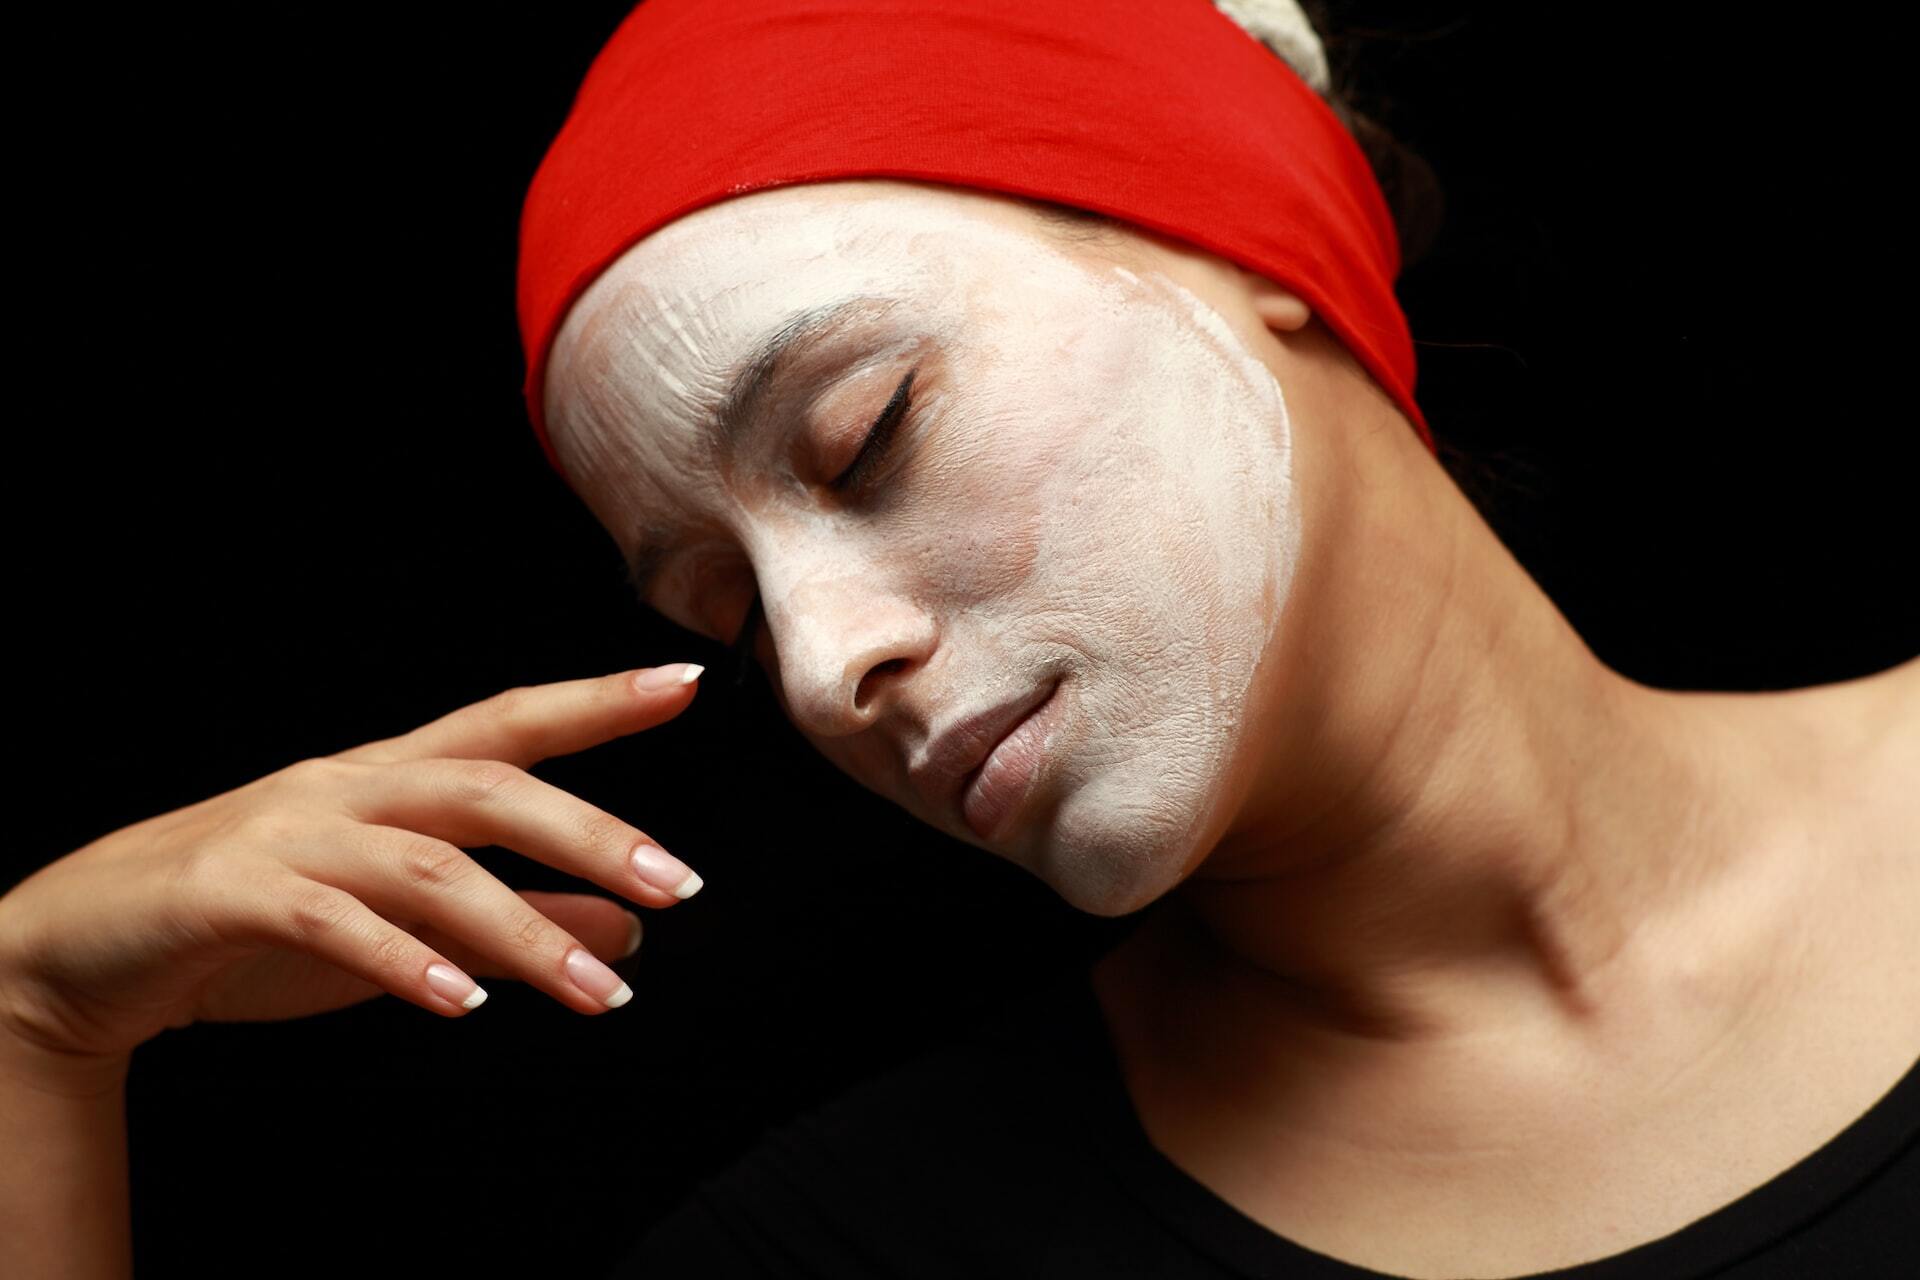 Woman has applied a skin mask to maintain her skin's health.